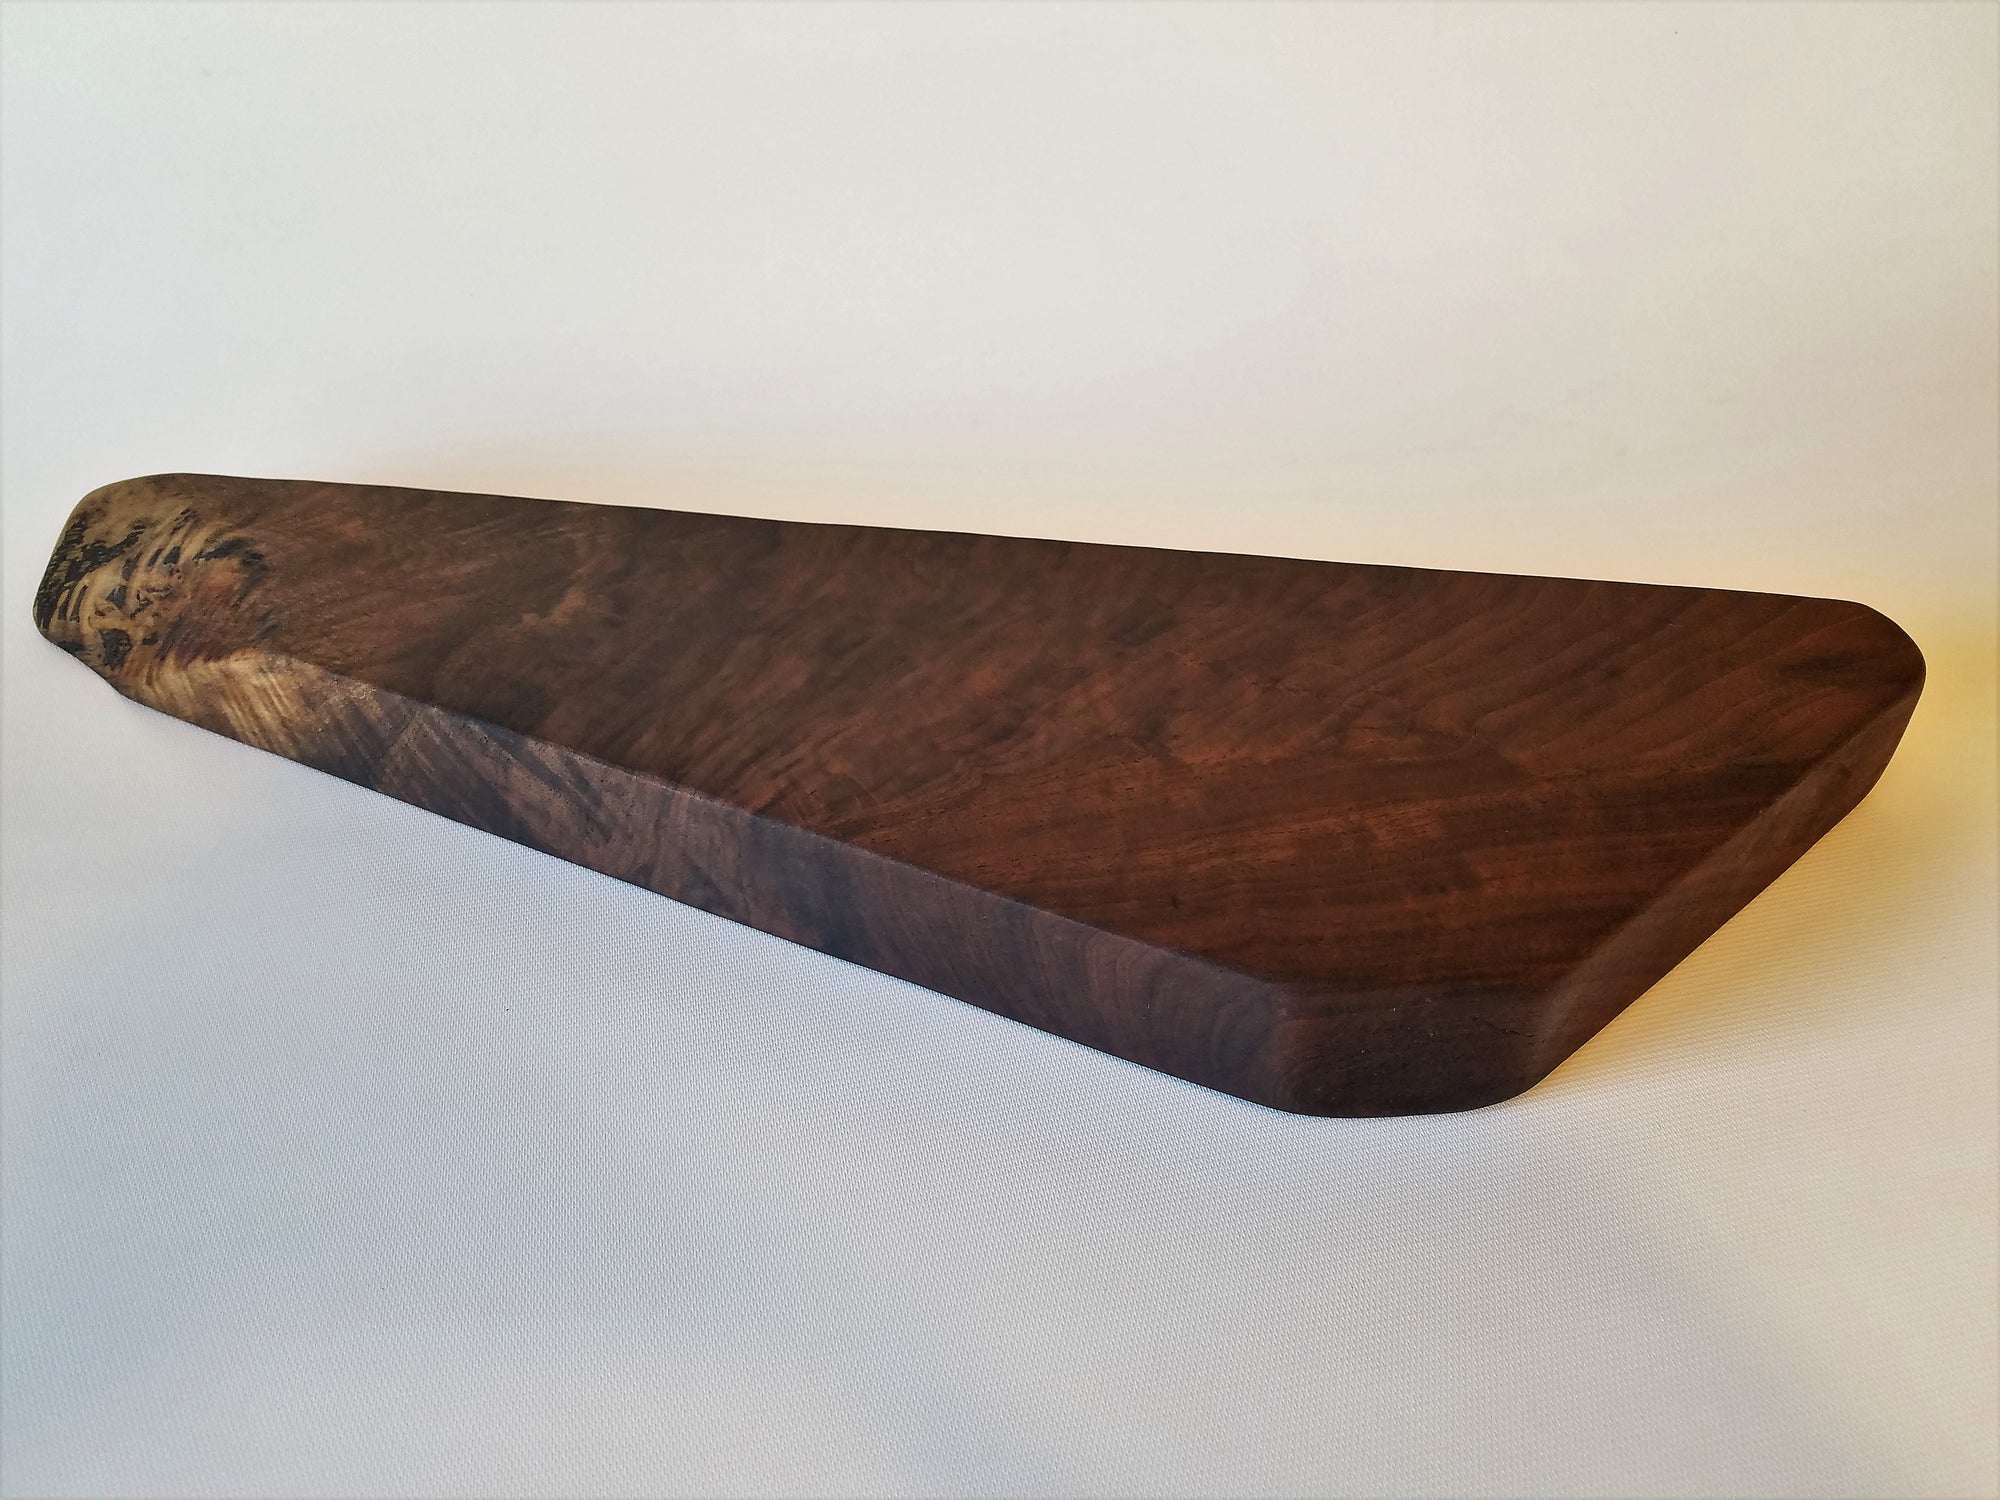 Charcuterie Board- Natural Wood- Serving Board- Food Server- Cutting Board- Walnut- Table Runner- Table Decor- Gift- Foodie- Chef- Cooking